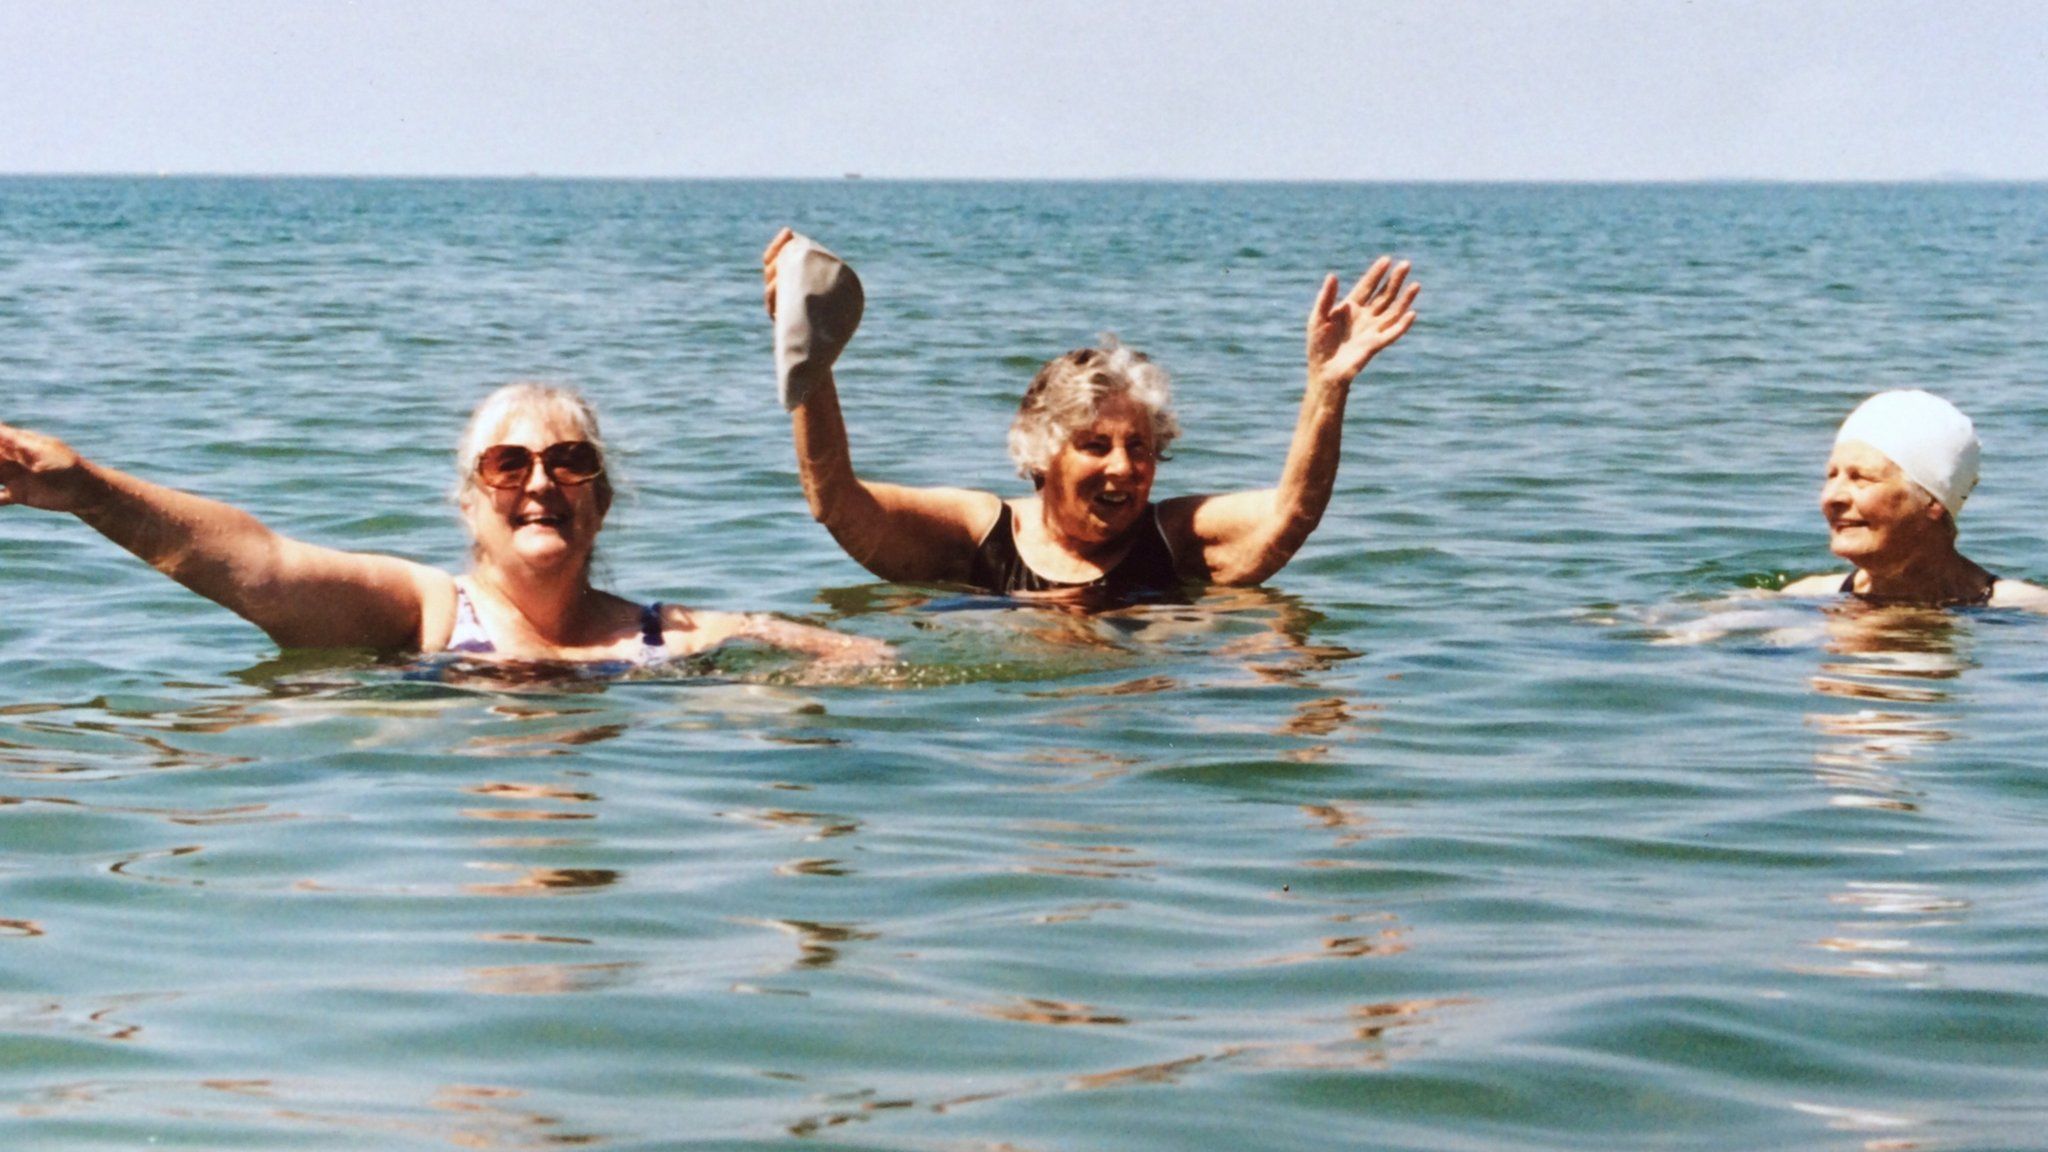 Joyce Currie in 2006 aged 81 swimming off Fairbourne beach with friends Sandra and Eileen